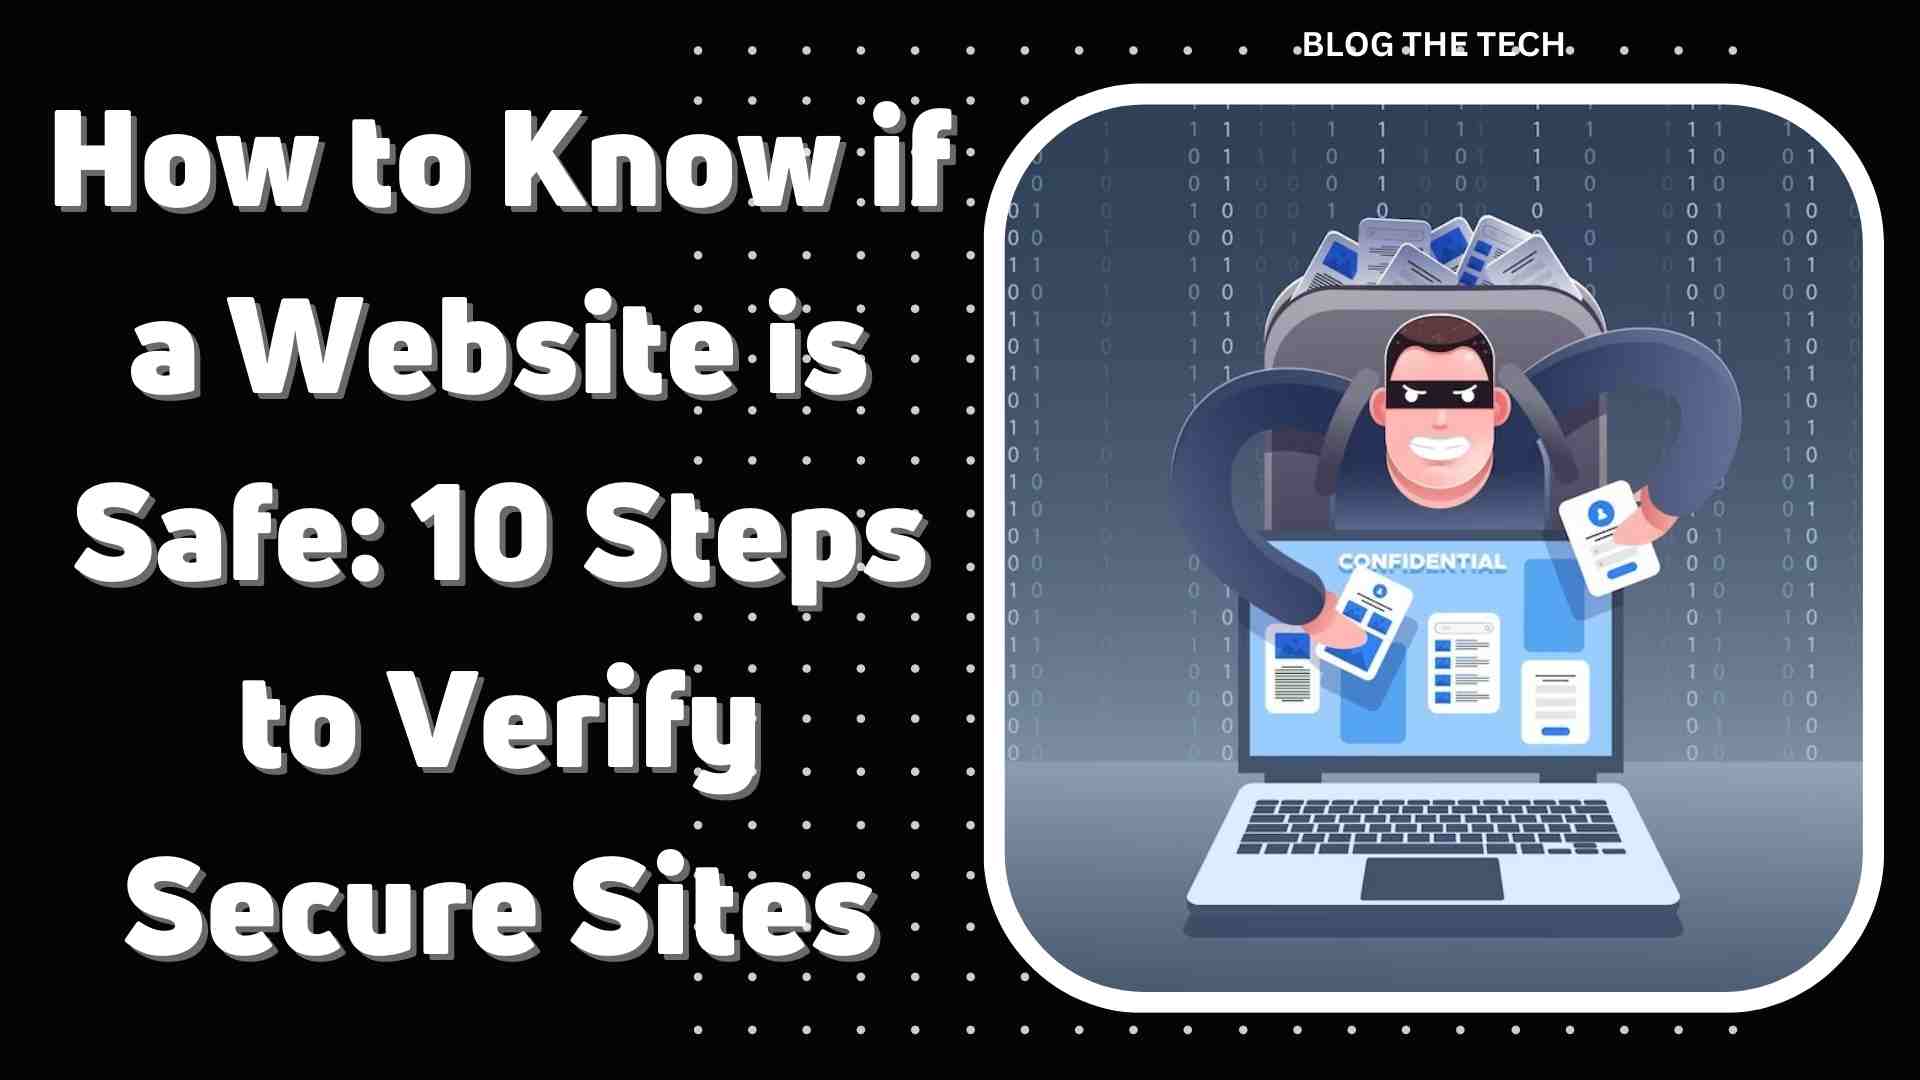 How to Know if a Website is Safe: 10 Steps to Verify Secure Sites